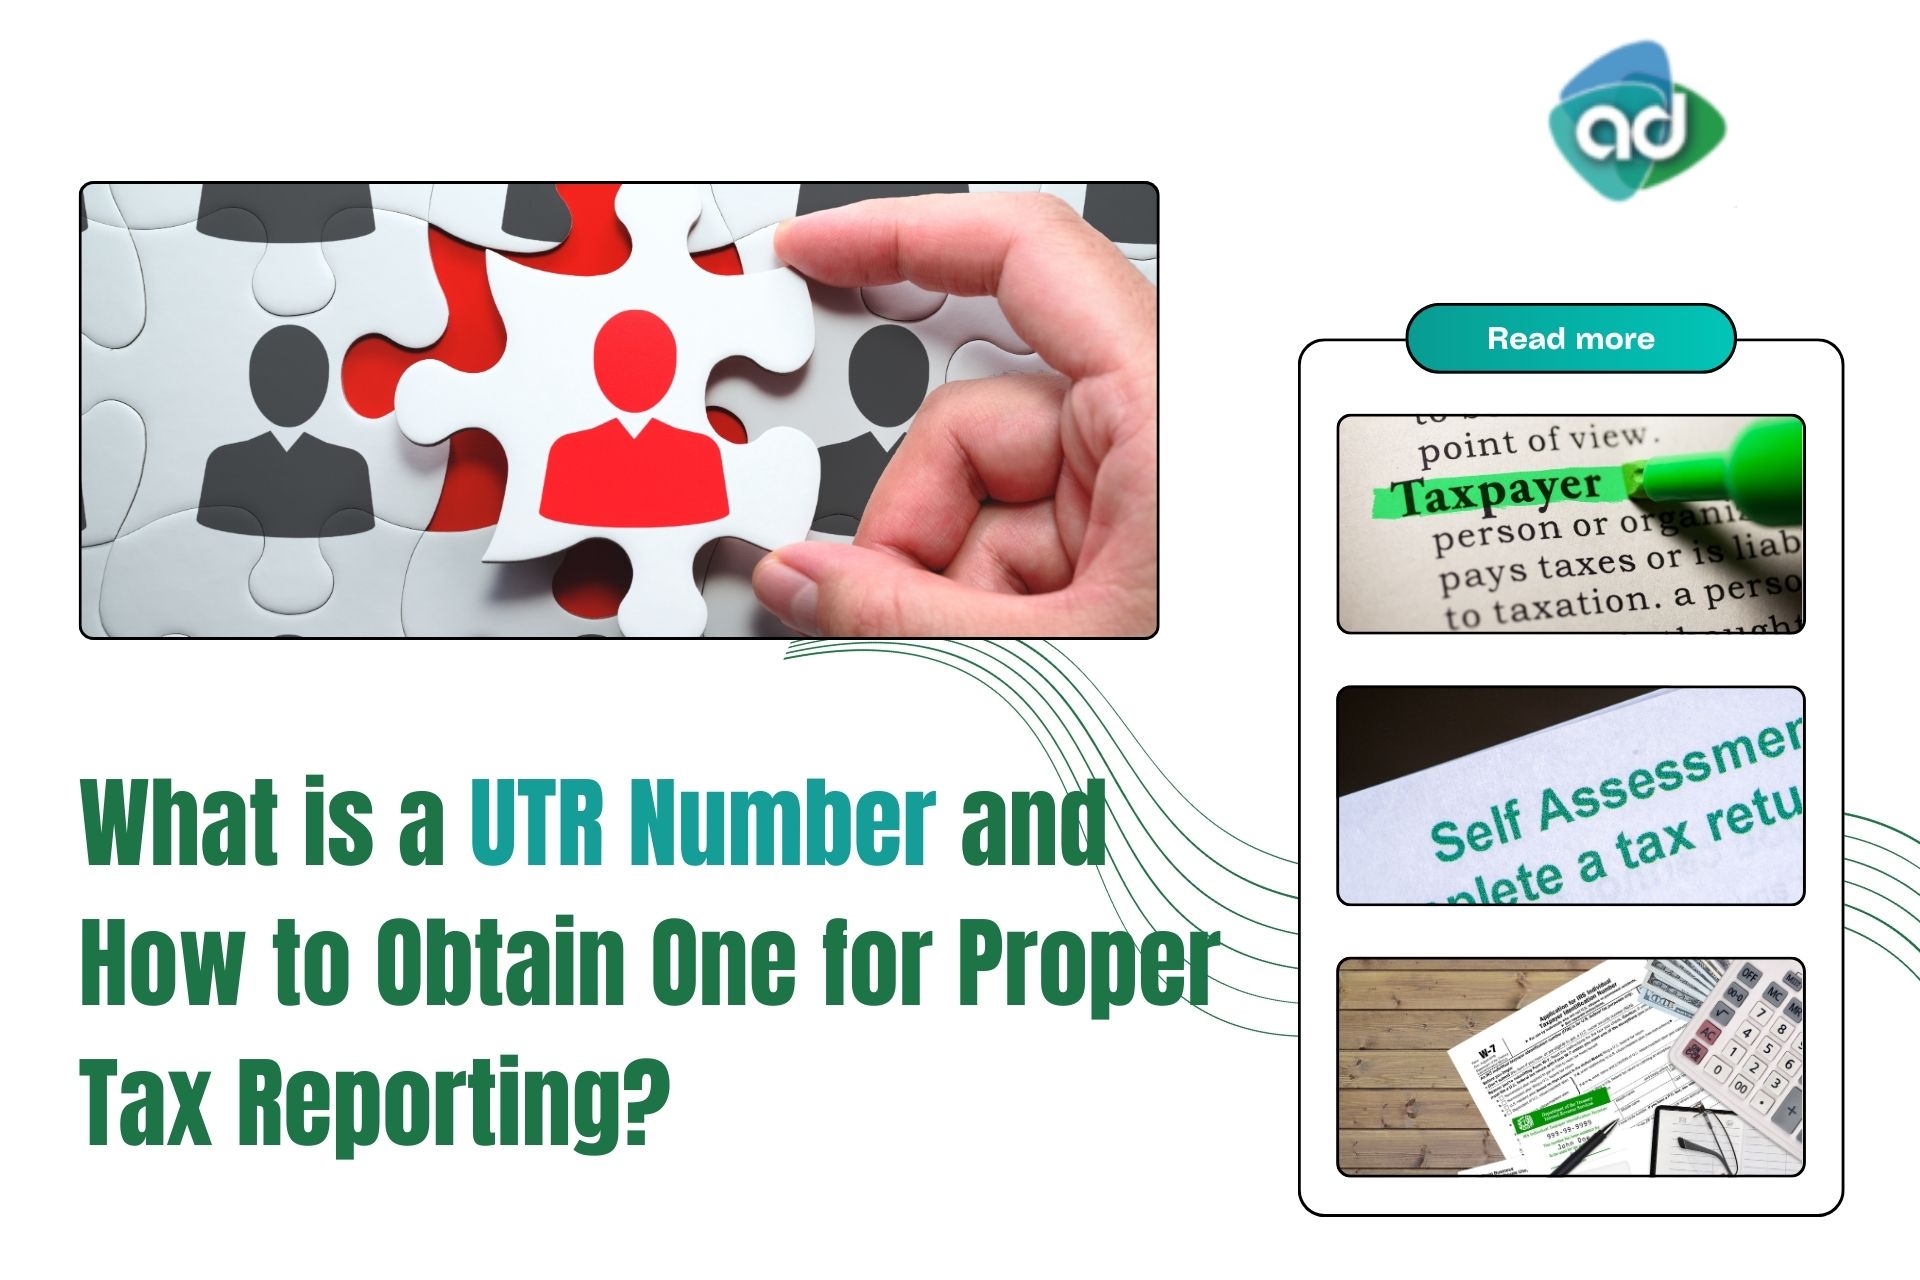 What Is A UTR Number And How To Obtain One For Proper Tax Reporting?